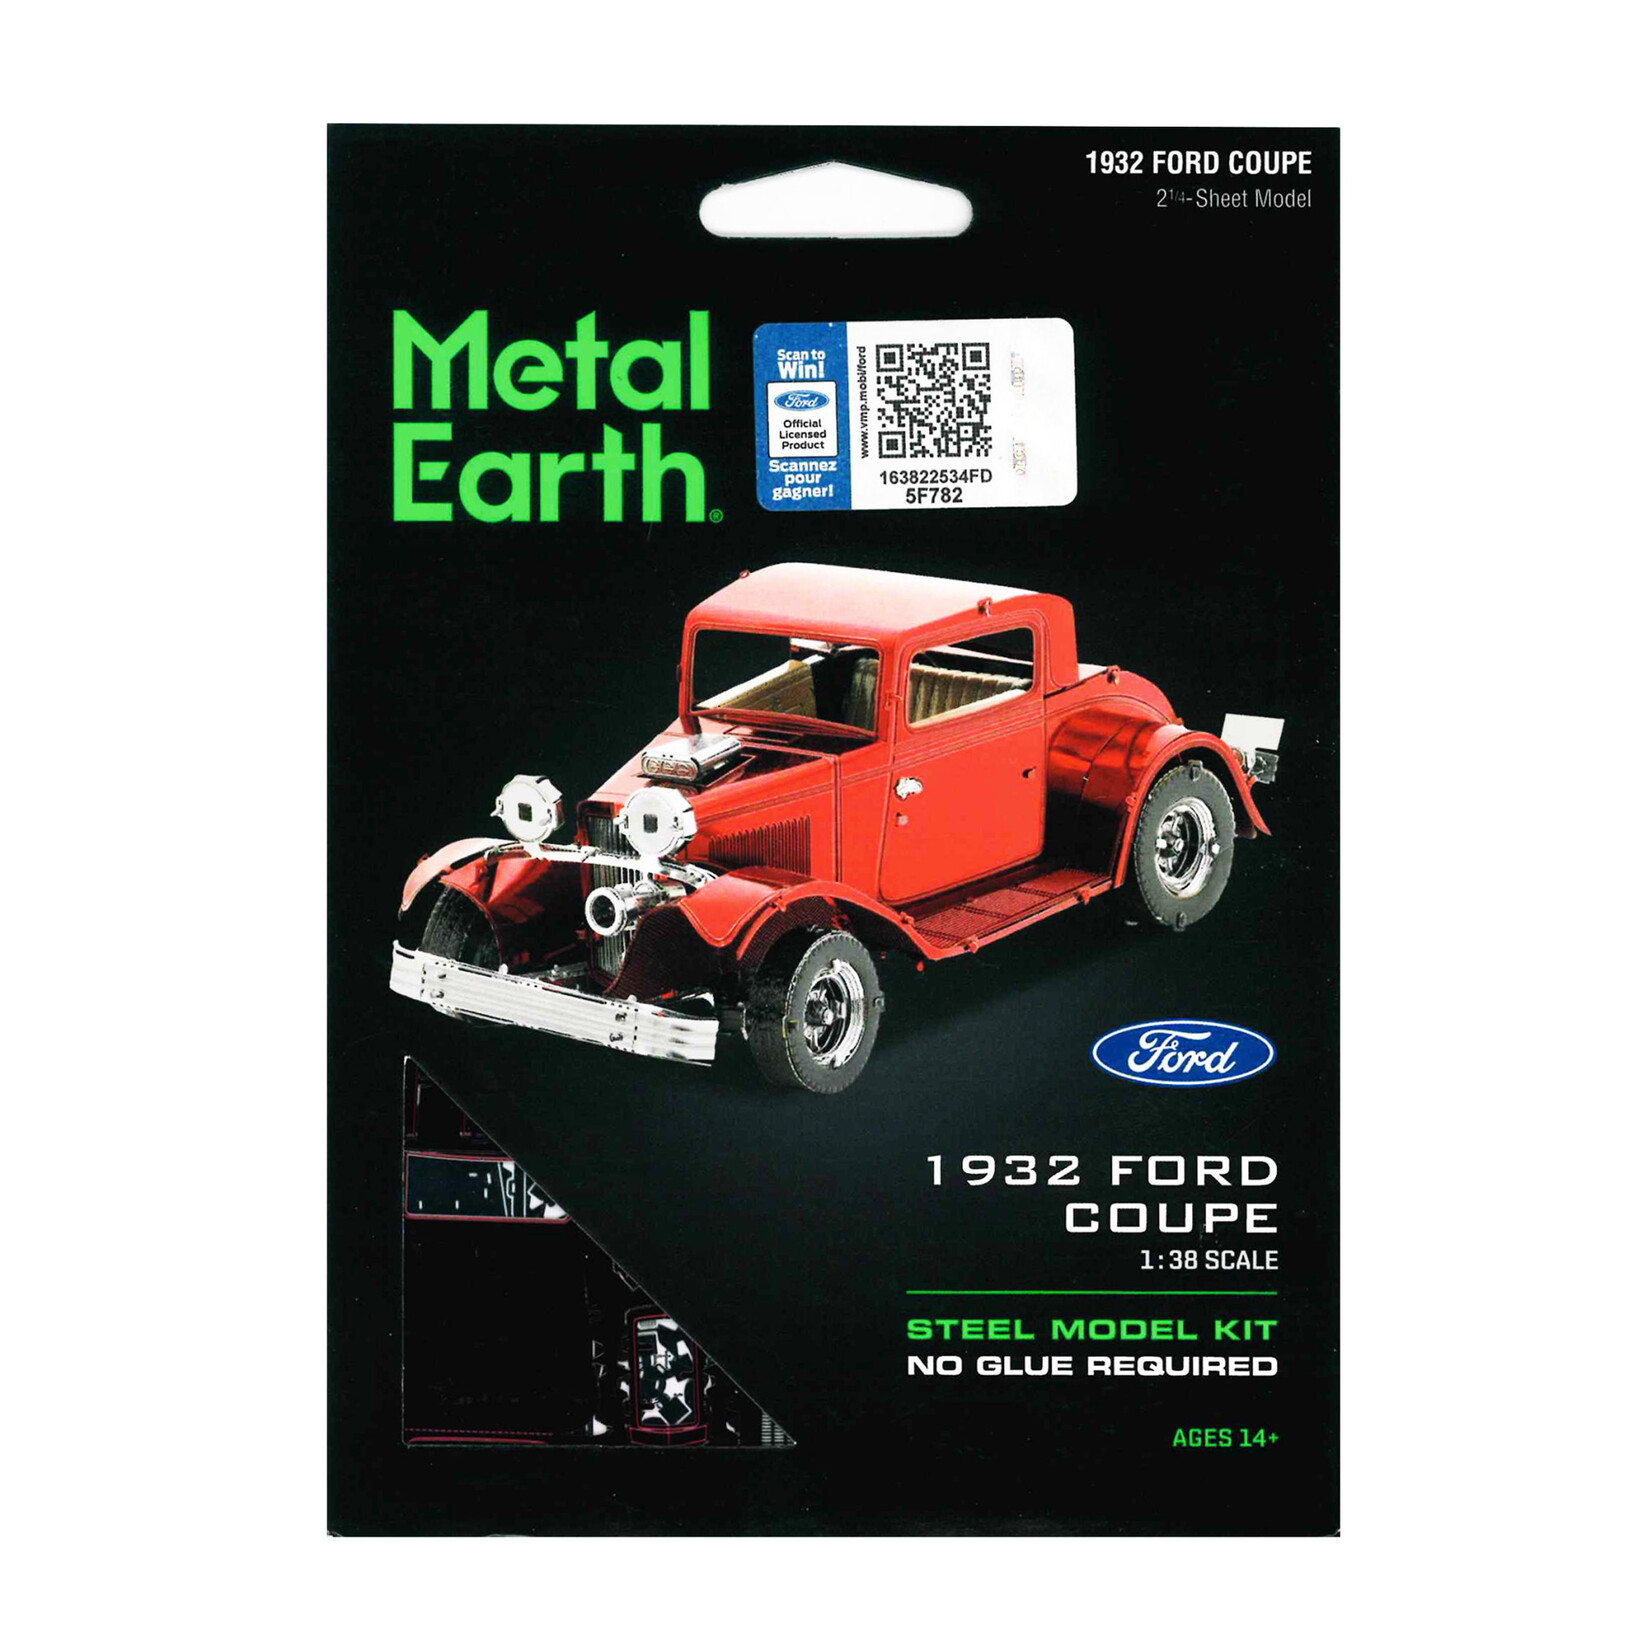 Metal Earth 1932 Ford Coupe